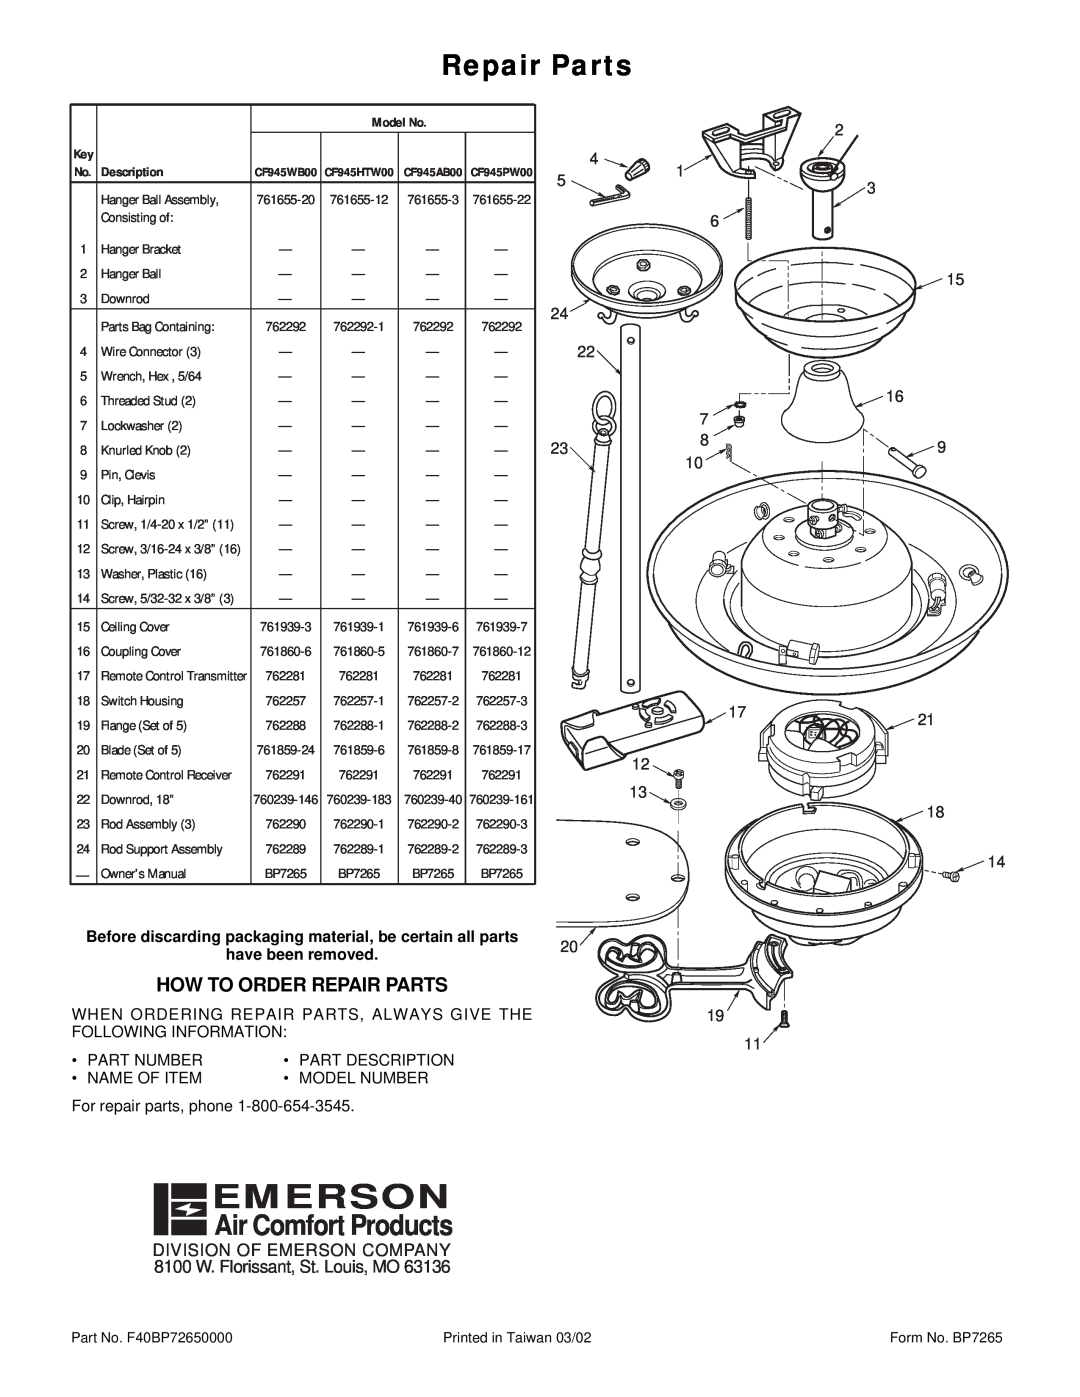 Emerson CF945WB Repair Parts, Air Comfort Products, 2 3 15, Division Of Emerson Company, 8100 W. Florissant, St. Louis, MO 